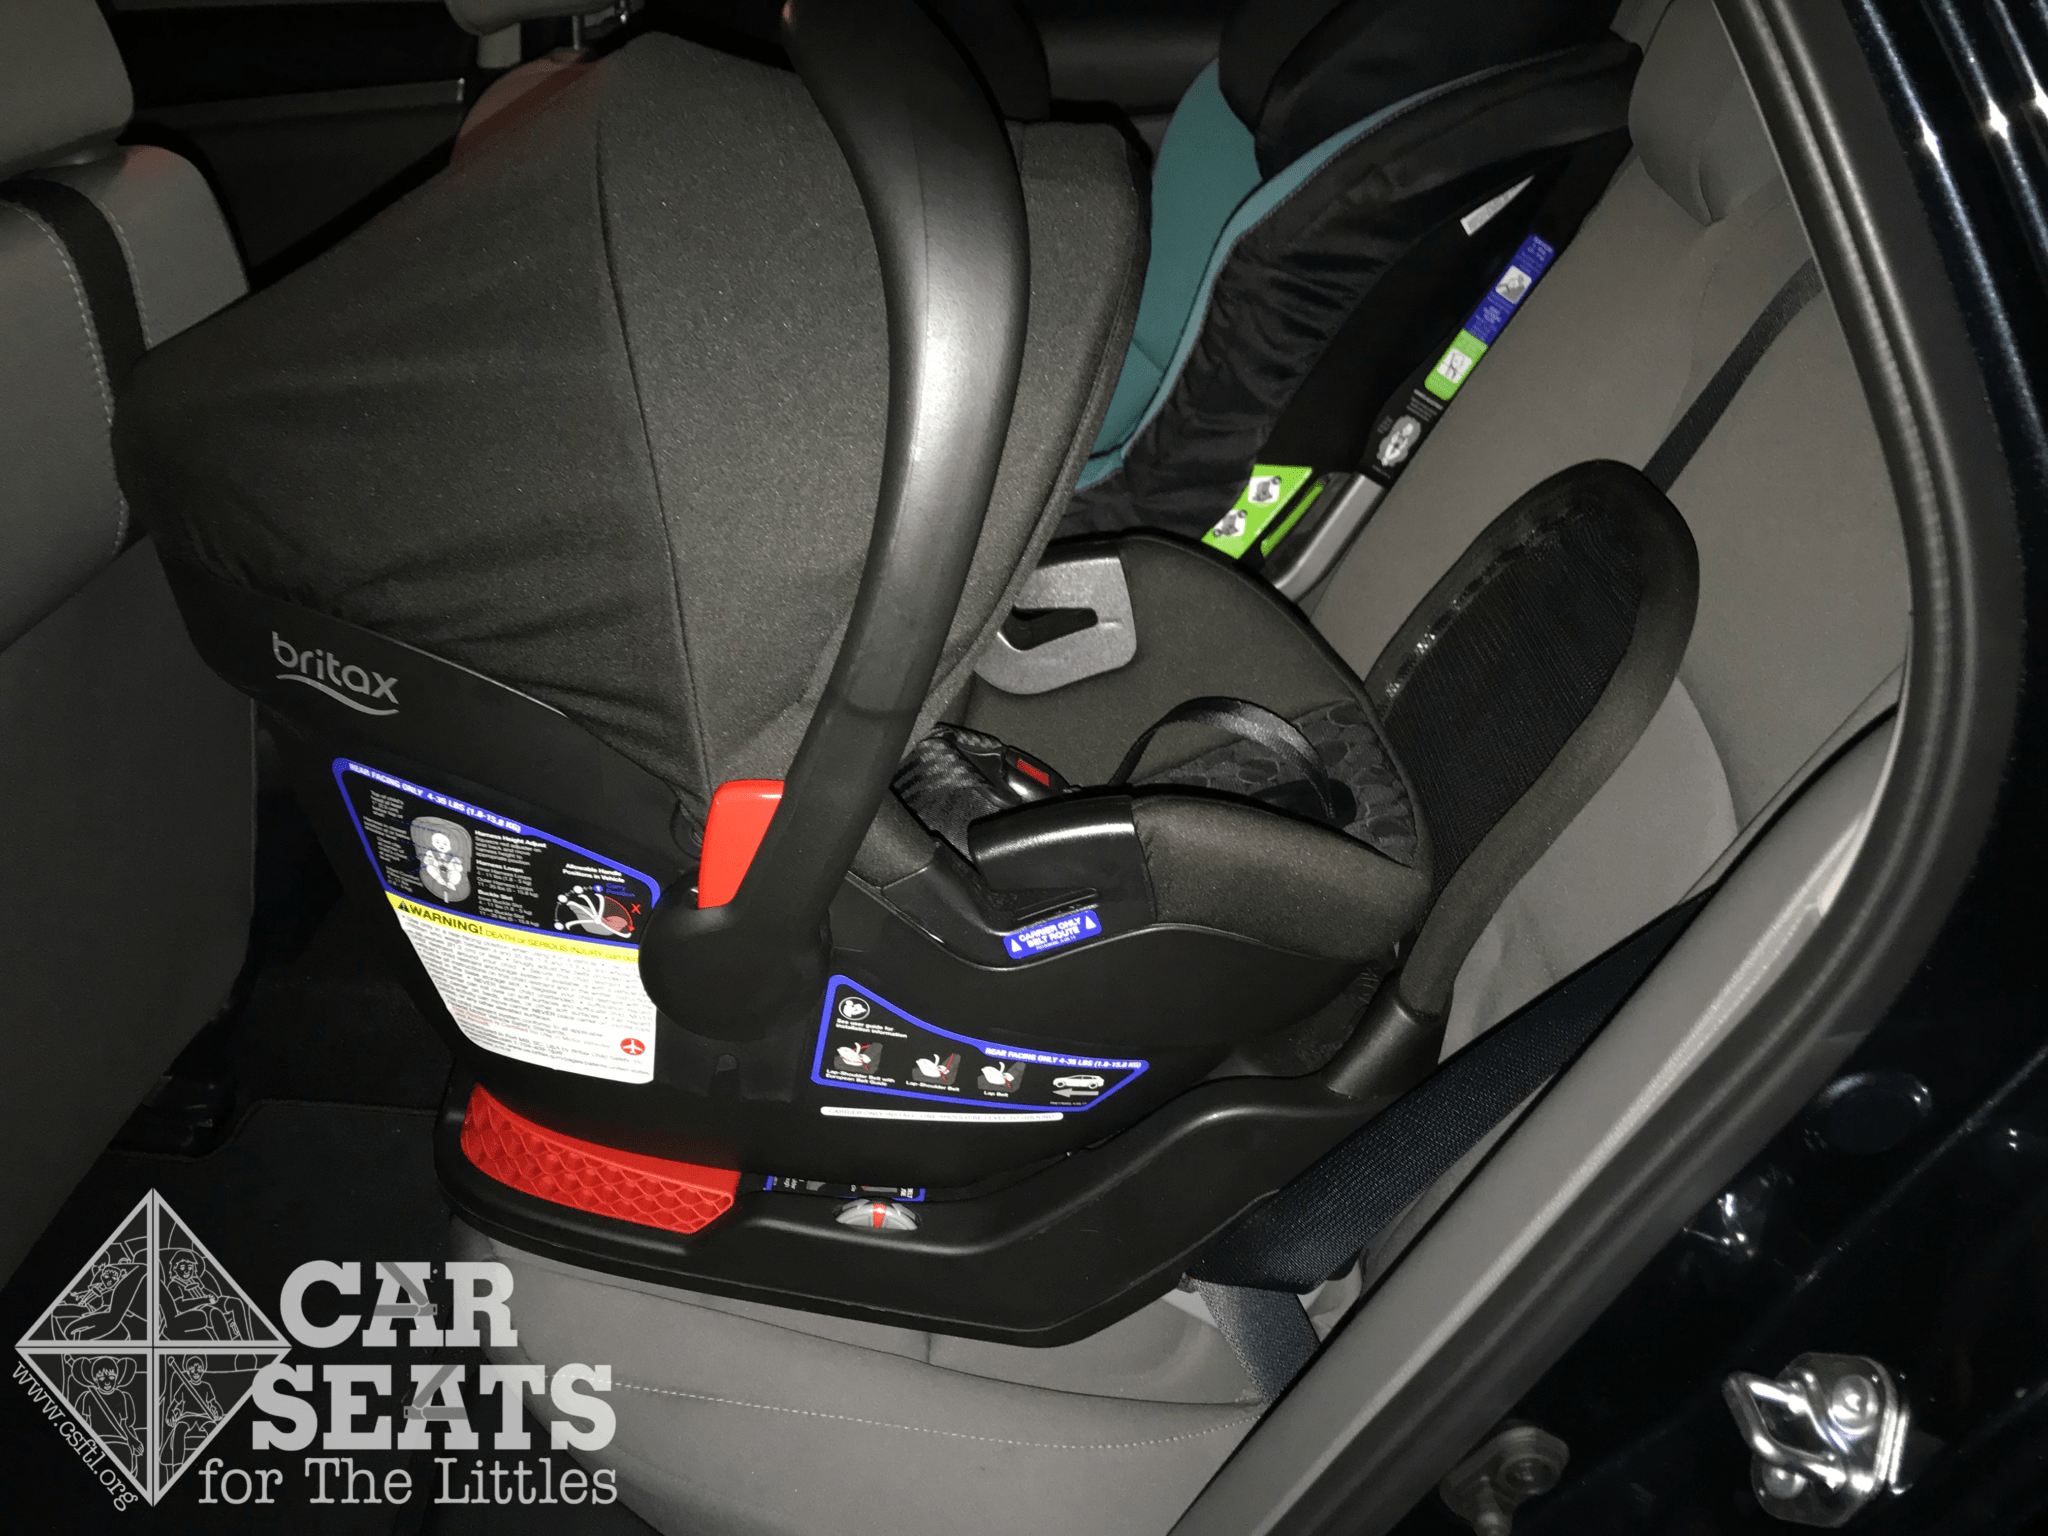 Britax Endeavours Review Car Seats, How To Remove A Britax Car Seat From Base